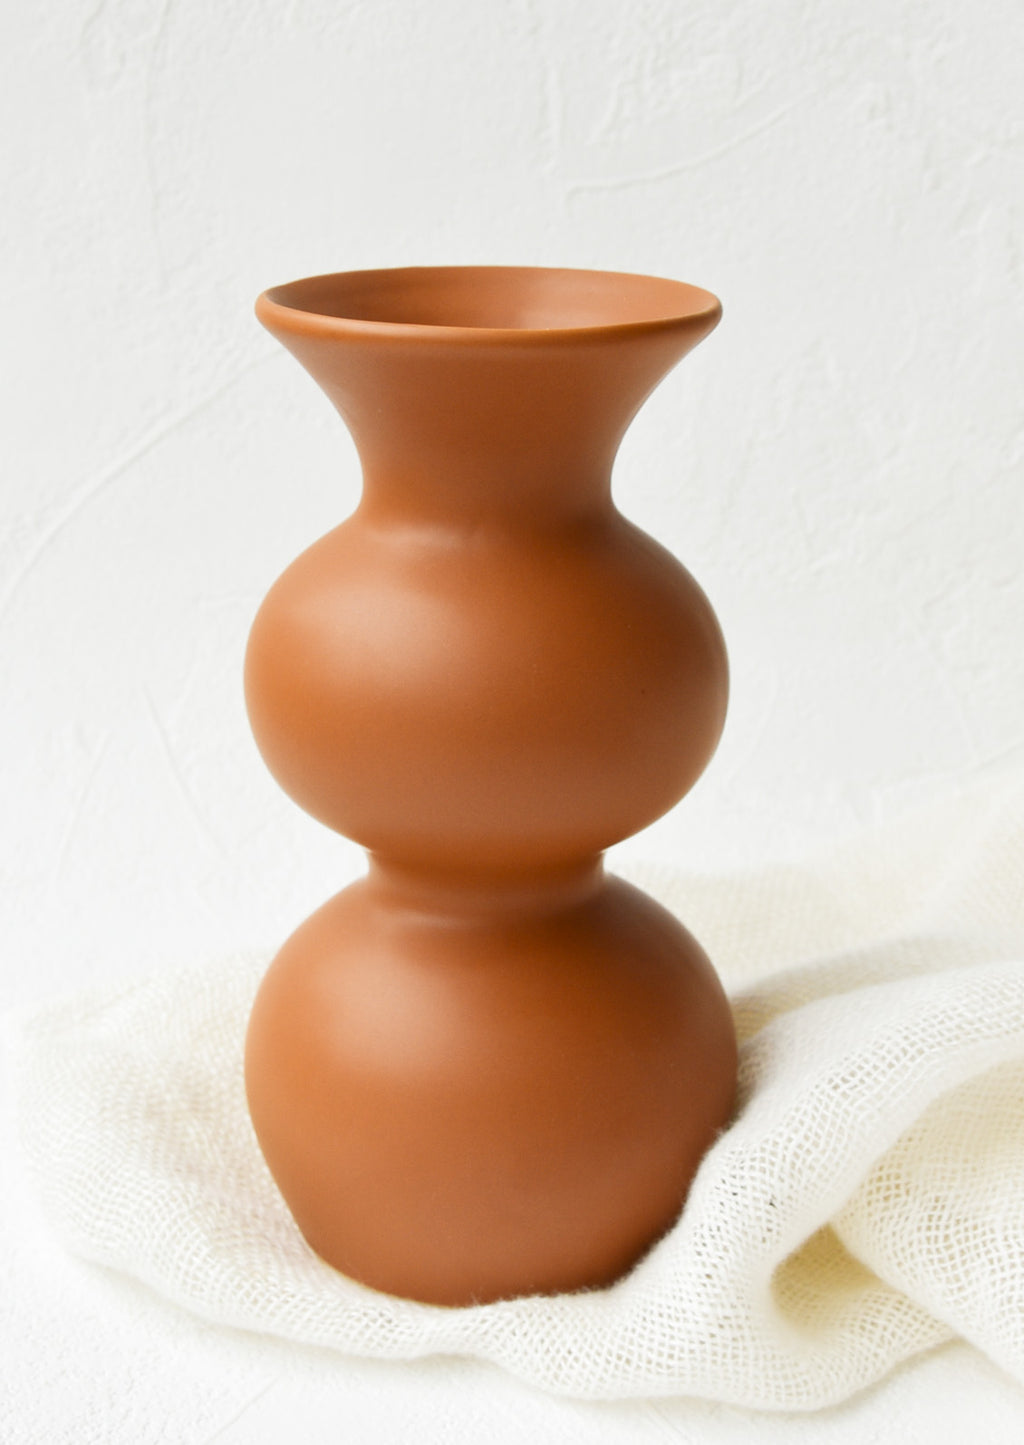 1: An hourglass shaped vase in a terracotta colored glaze